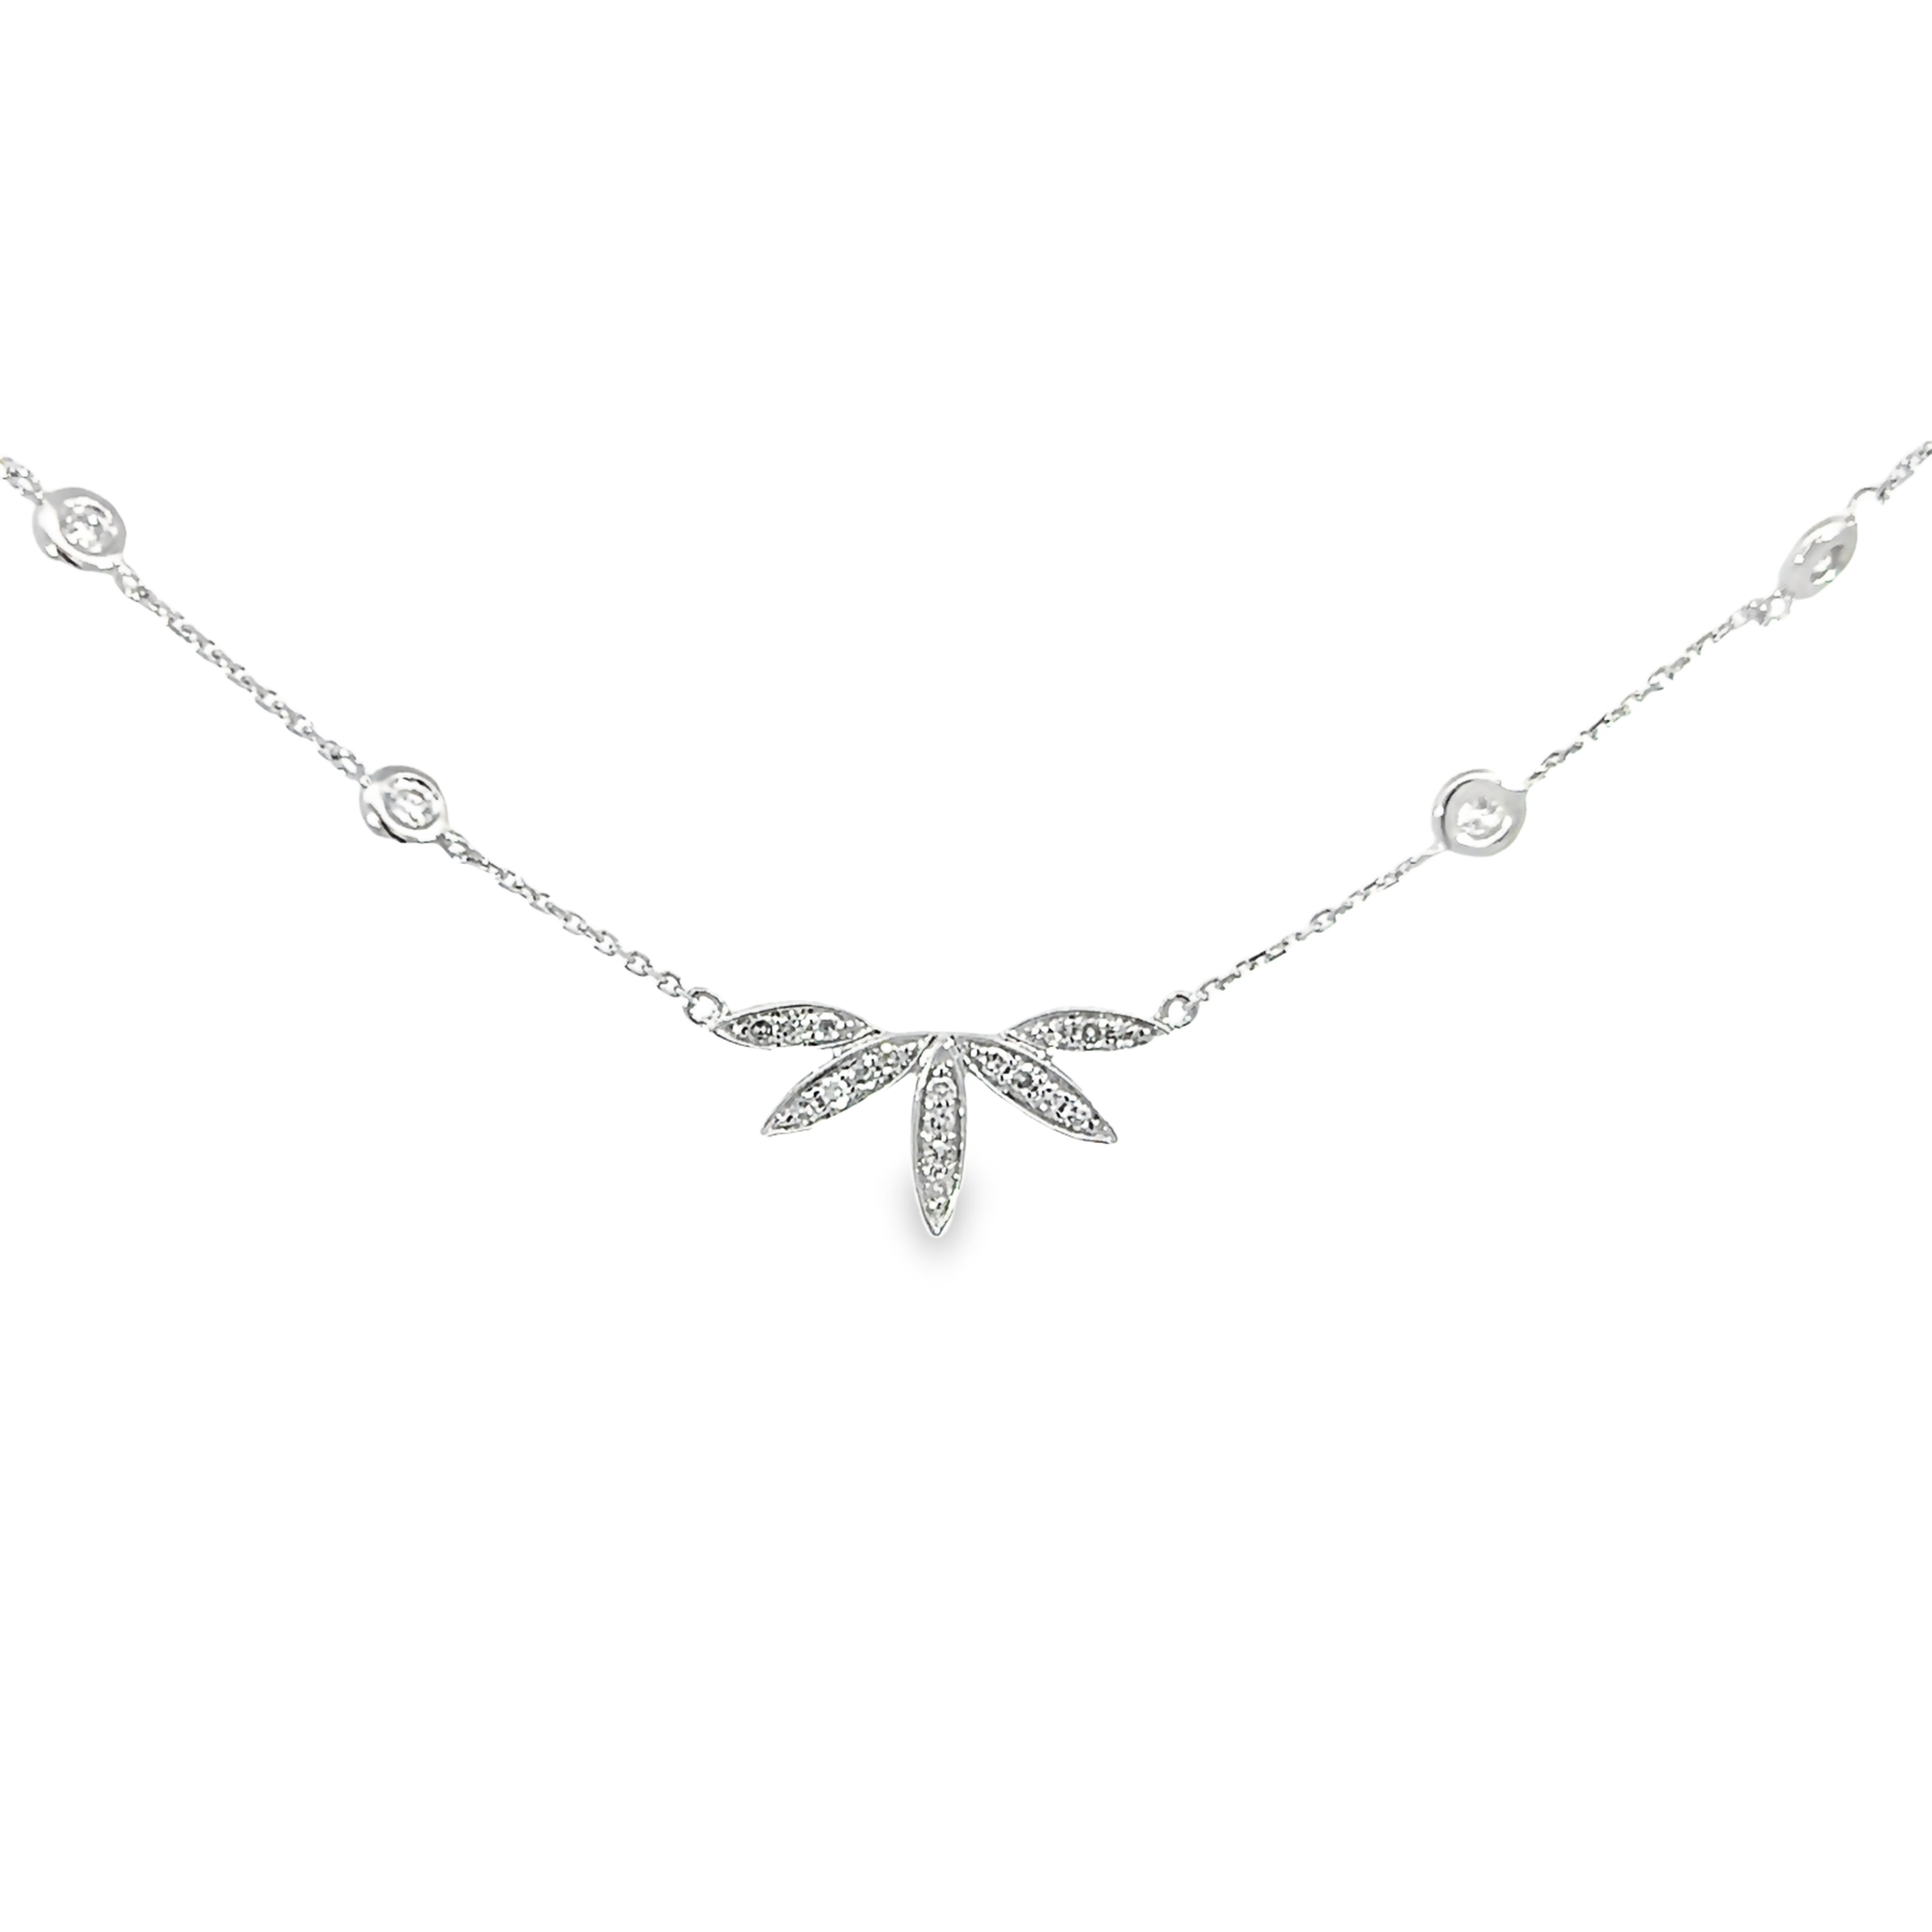 14 Karat white gold station necklace with 24=0.26 total weight single cut G I Diamonds